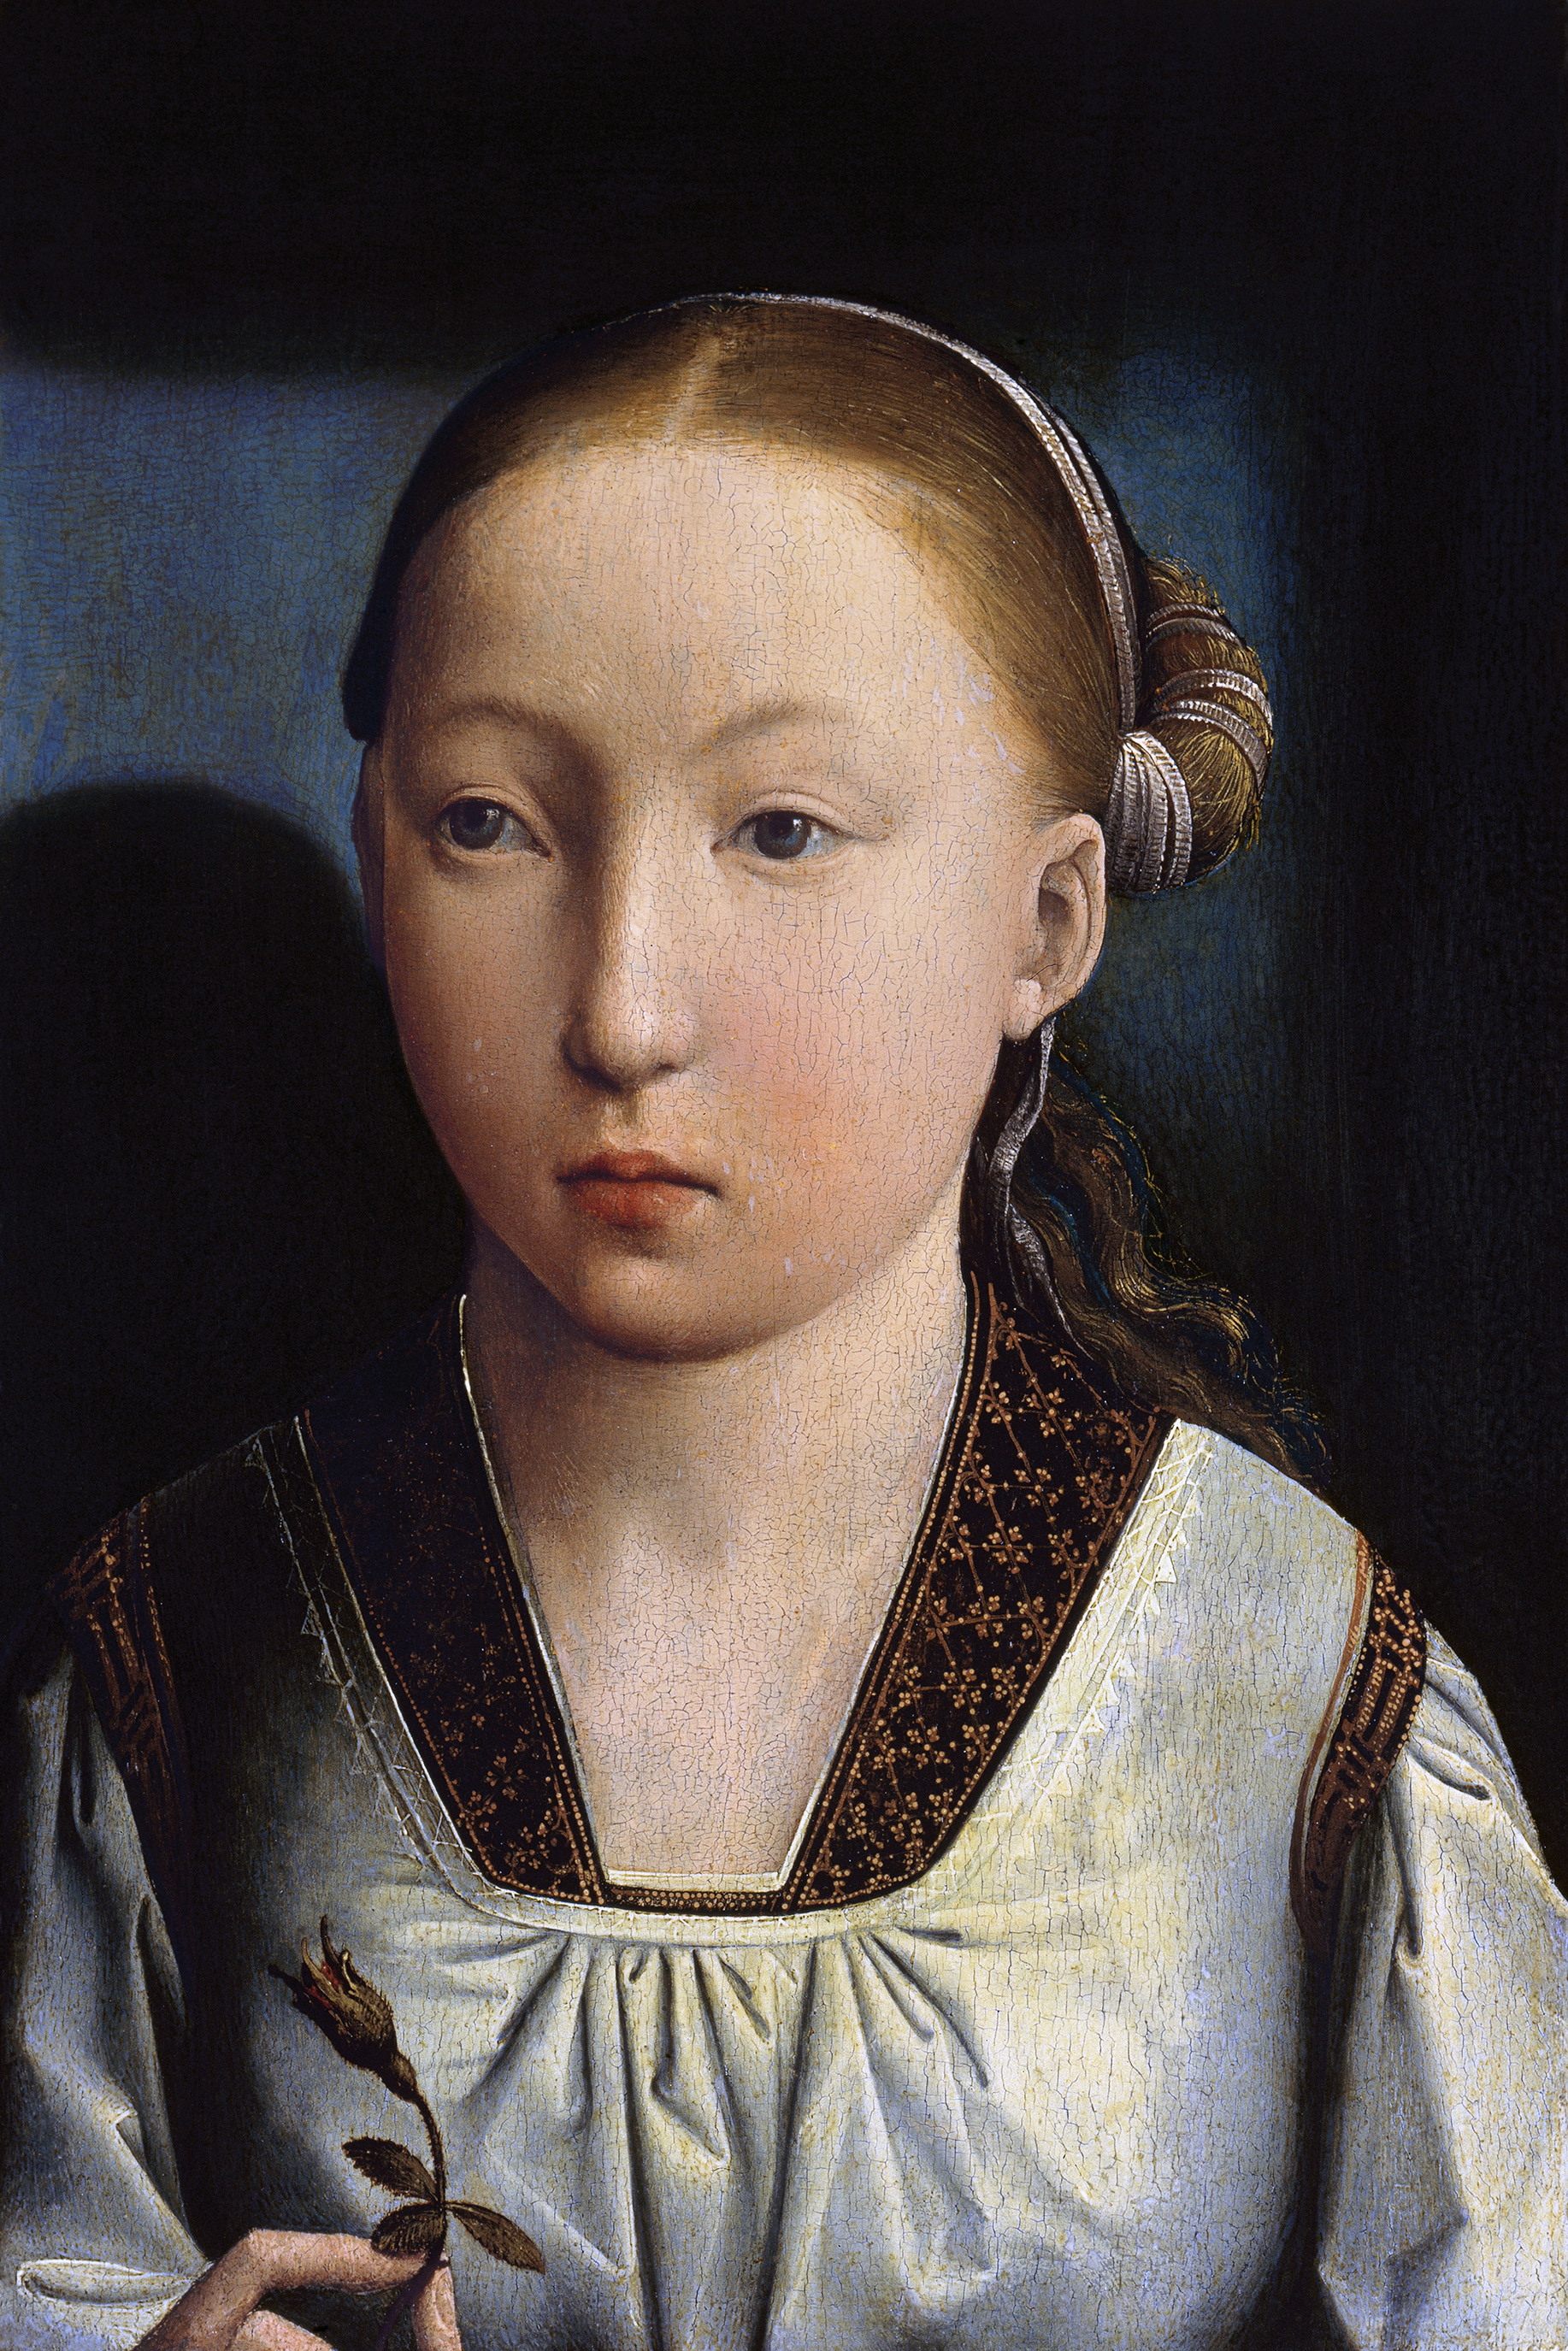 A Young Katherine of Aragon, married at Old St Paul's in 1501